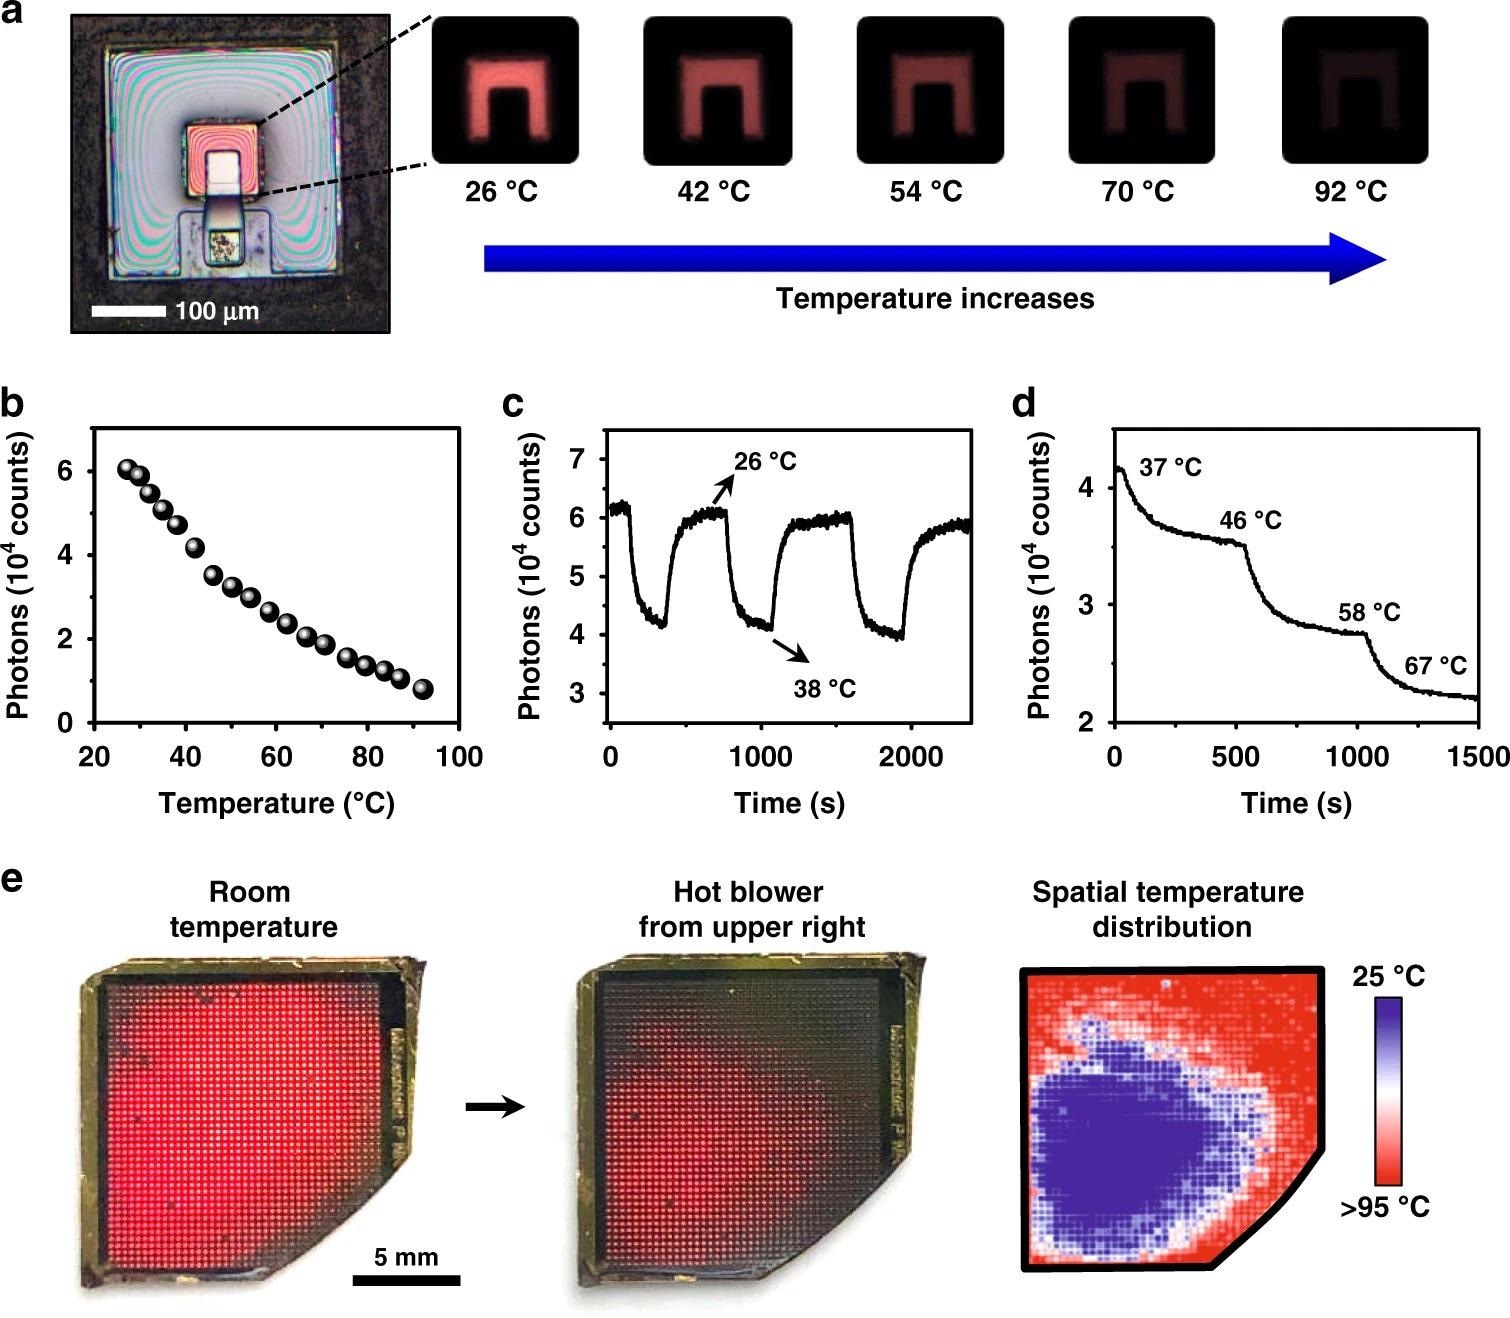 Dynamic thermal sensing and mapping based on the upconversion devices. Microscopic images show PL emissions of an optoelectronic upconversion device, with the intensity changing with the temperature from 26?°C to 92?°C. b Relation of PL intensity versus temperature. c Cycled temperature test of the device repeatedly changes from 26?°C to 38?°C. d PL intensity of the device responding to step-tuned temperature changes. e Spatially resolved PL responses of a device array at room temperature (left) and under nonuniform heating (middle). Right: the corresponding temperature mapping.